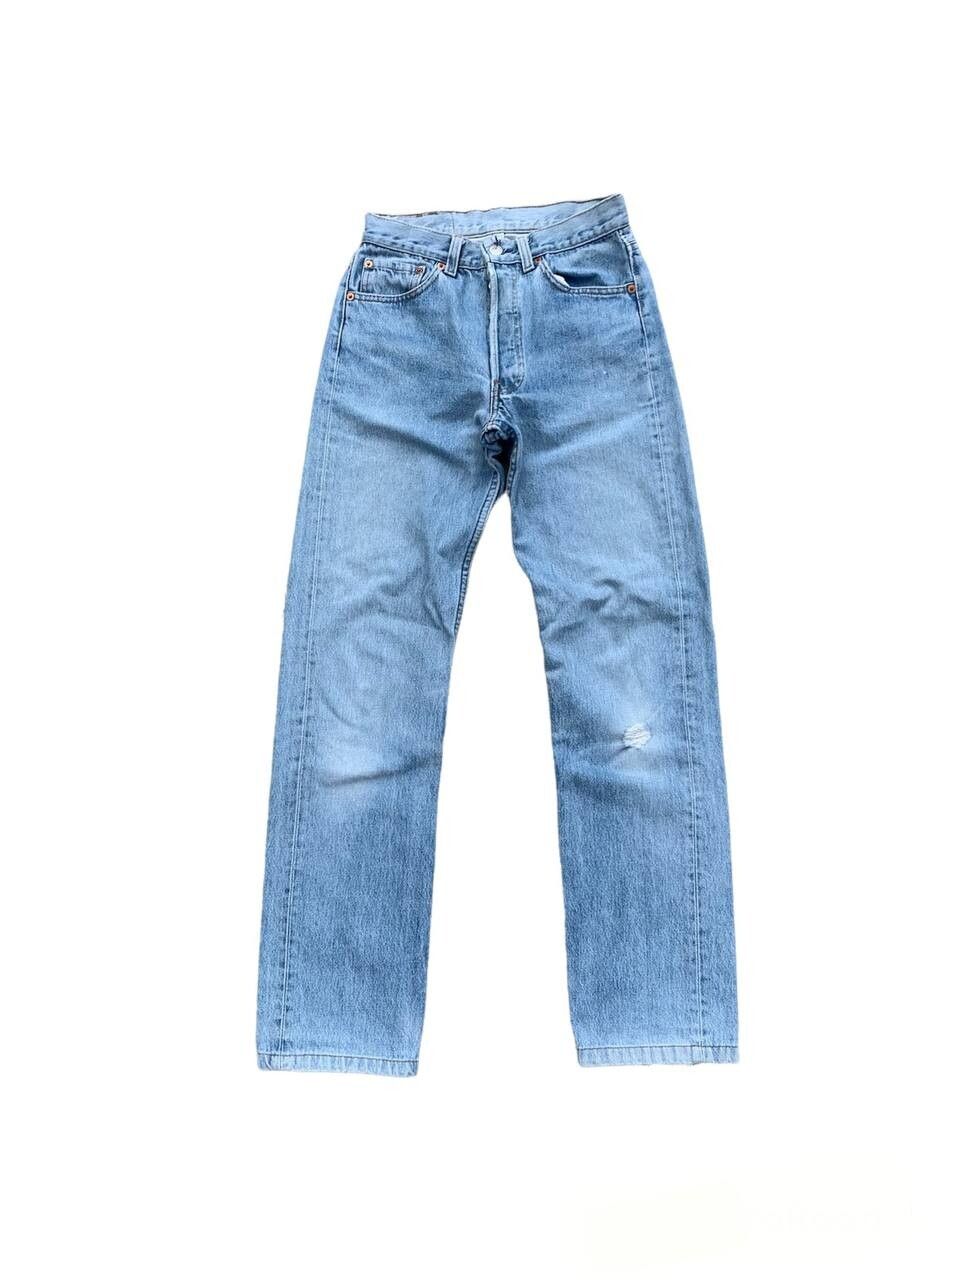 Pre-owned Levis X Vintage Levis 501 Button Fly Light Washed Distressed Vintage Jeans In Denim